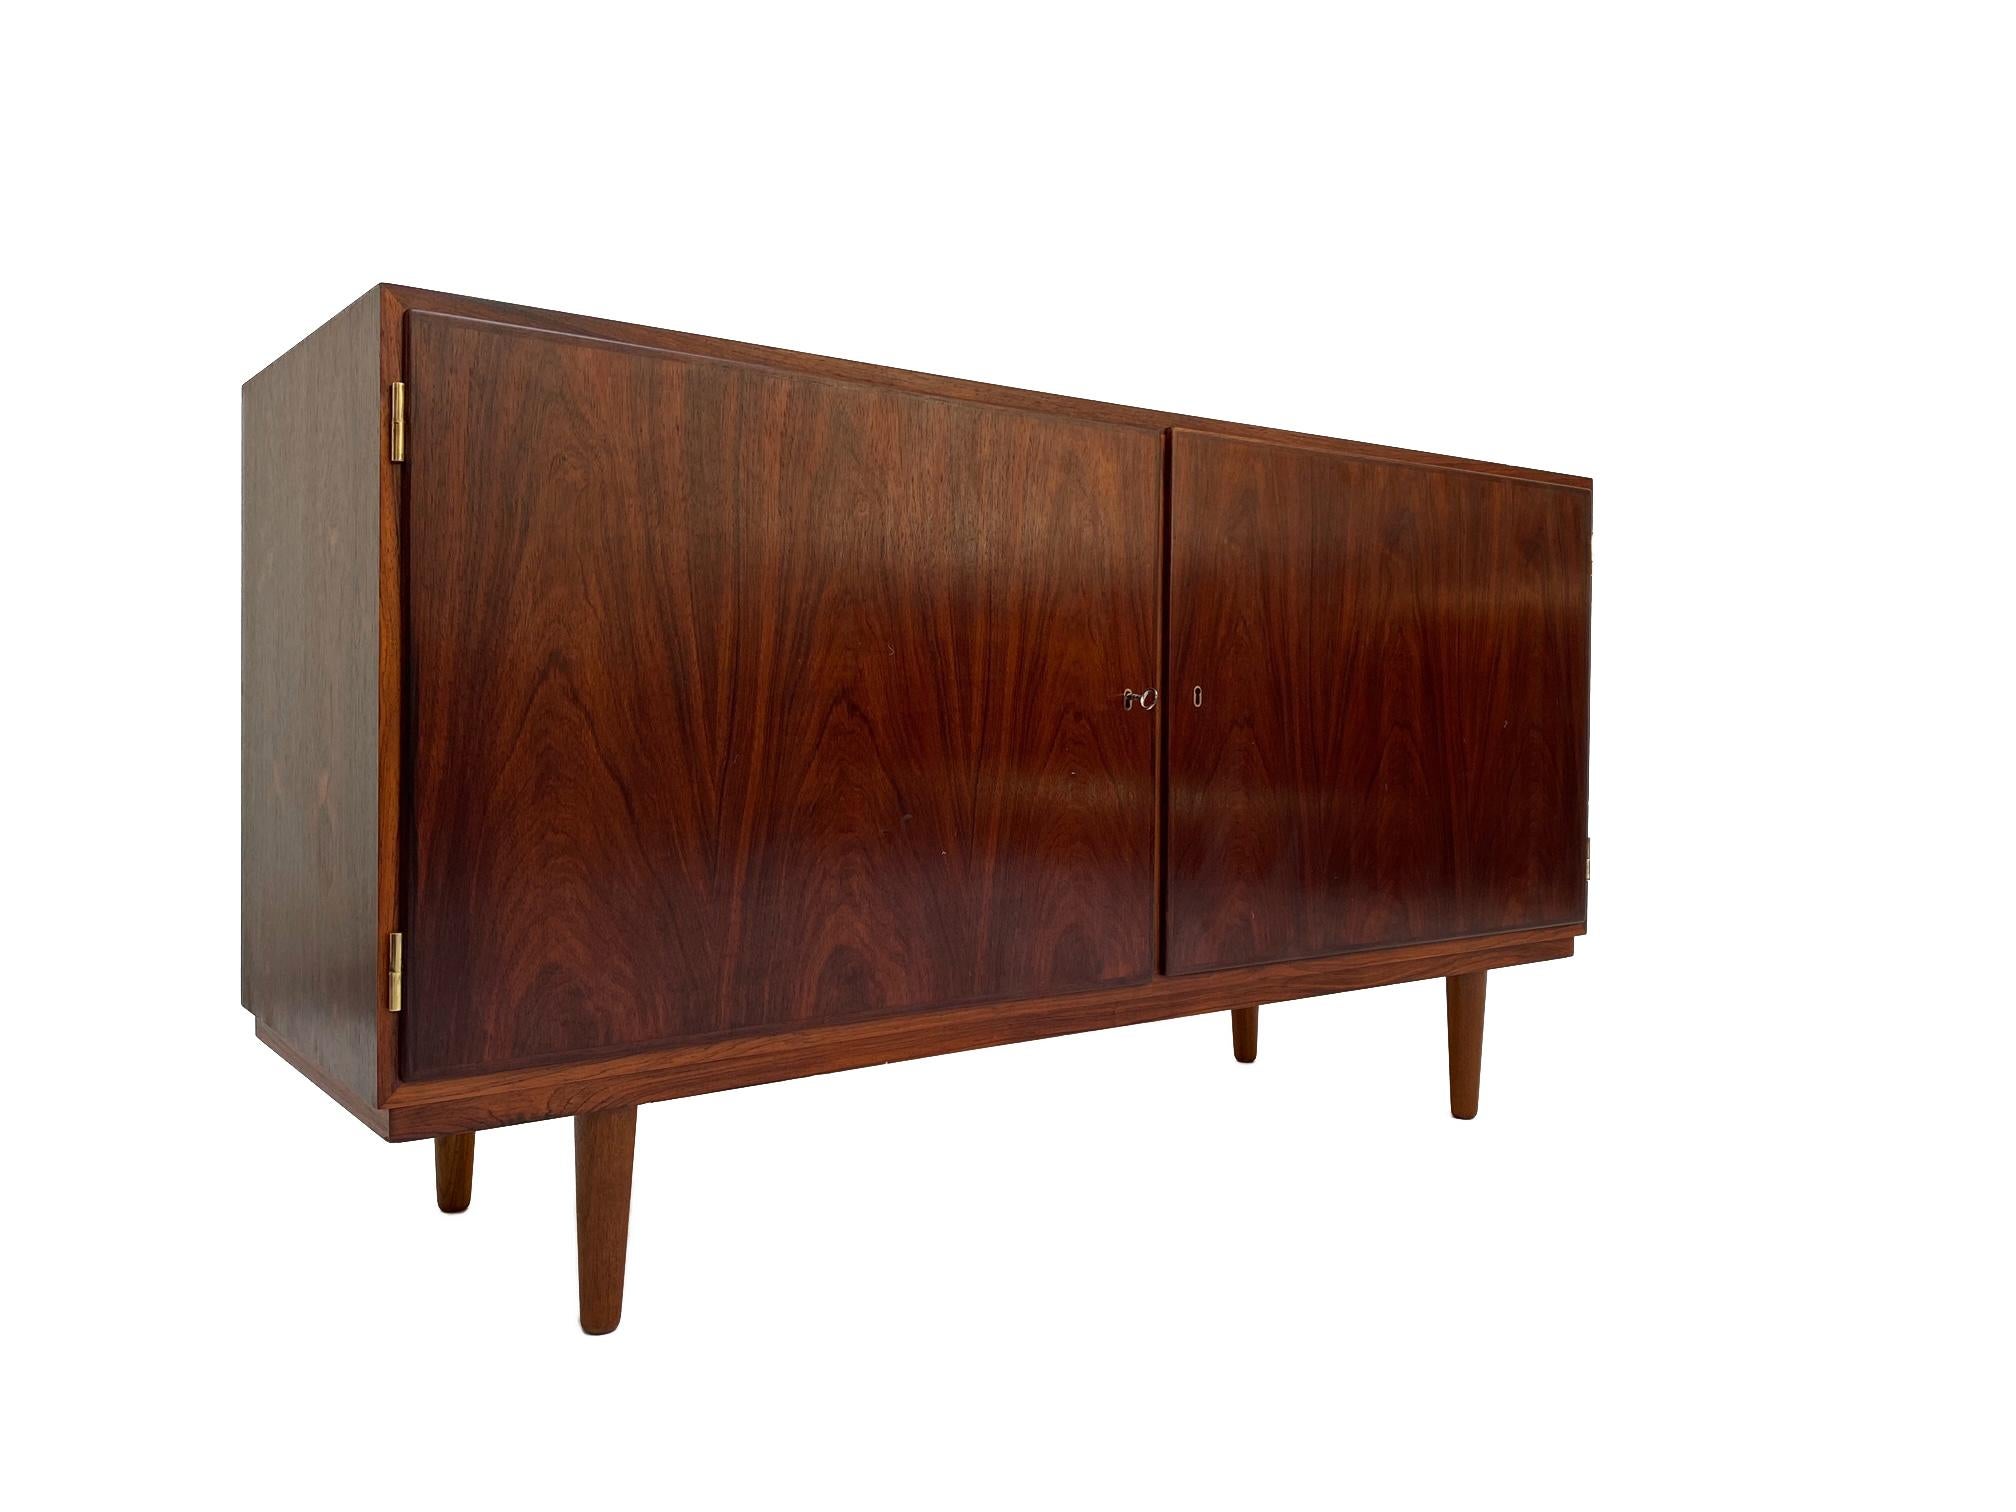 Designed by Carlo Jensen for Poul Hundevad, this rosewood sideboard would make a beautiful addition to any work or home environment. 

Jensen integrates structural integrity with functionality, the adjustable filing drawers can be arranged or